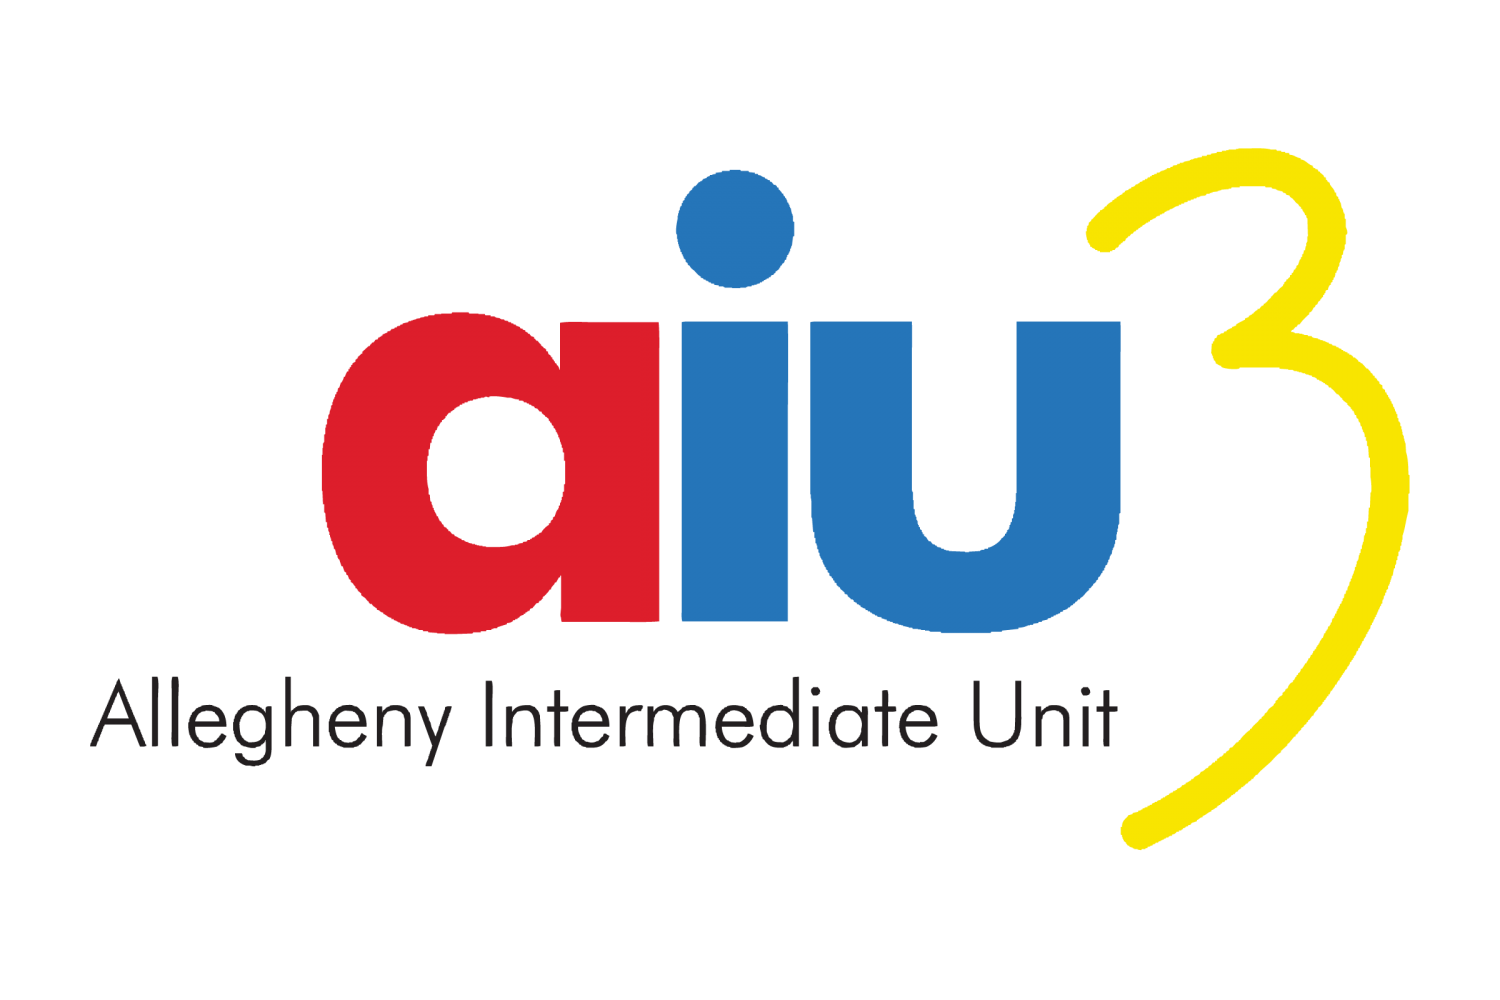 Allegheny Intermediate Unit (AIU3) logo, with red and blue letters and a hand-drawn number 3